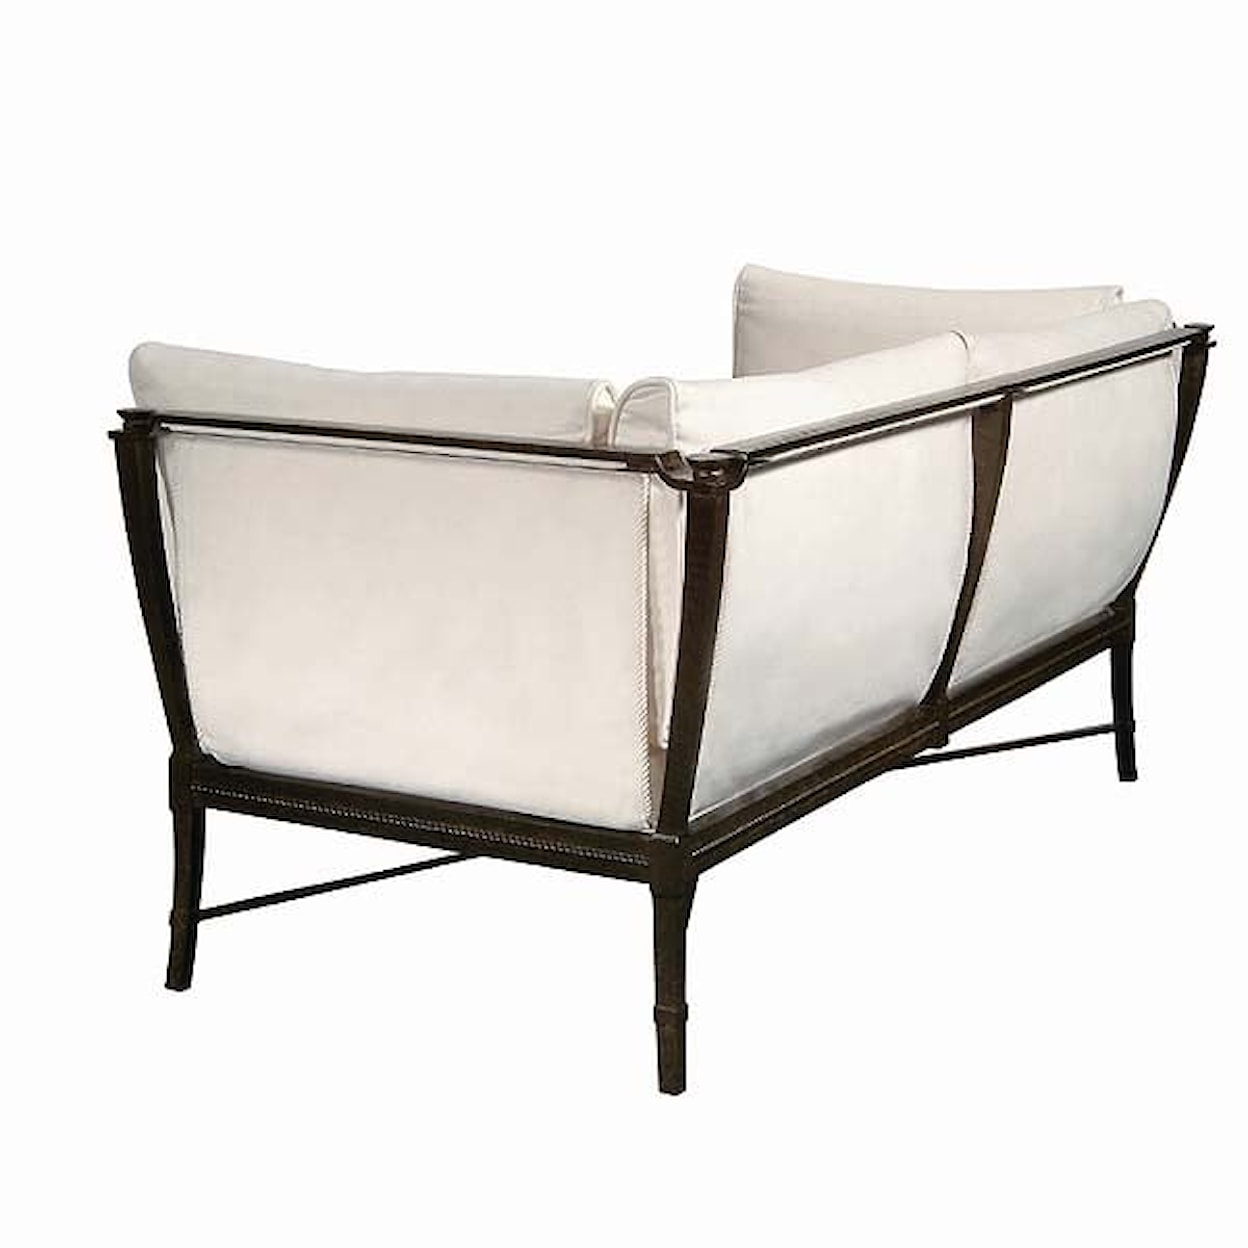 Century Andalusia Outdoor Loveseat